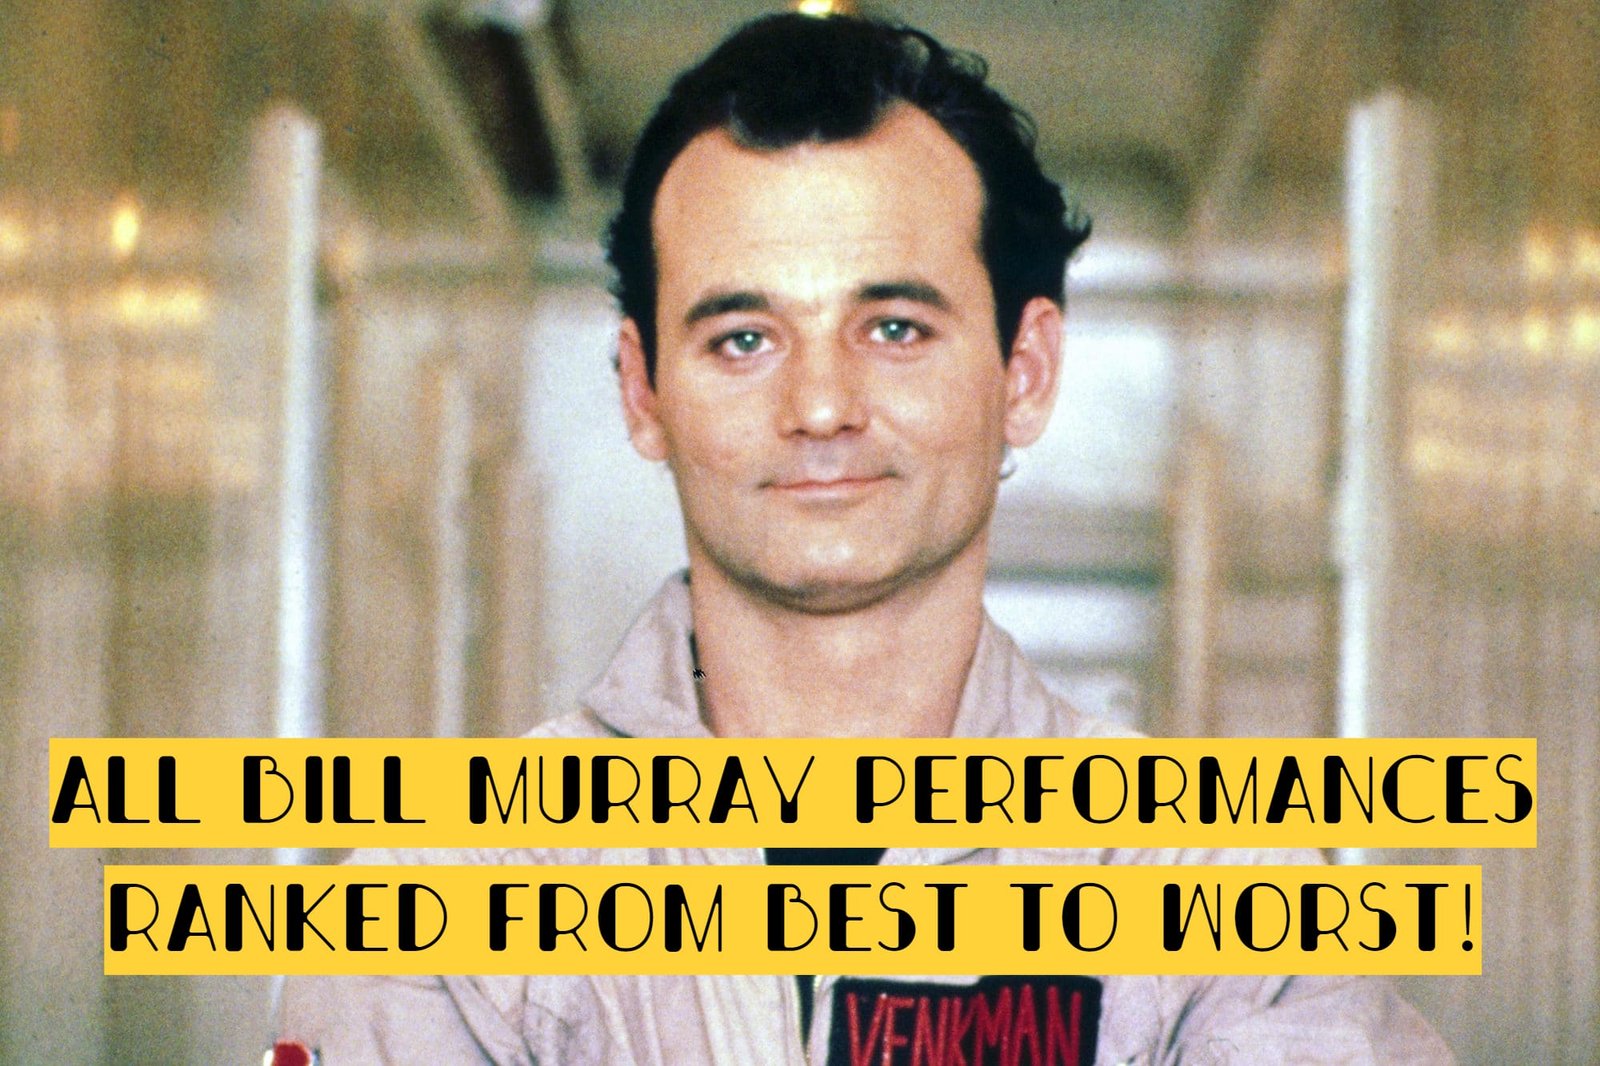 All Bill Murray Performances Ranked From Best to Worst!